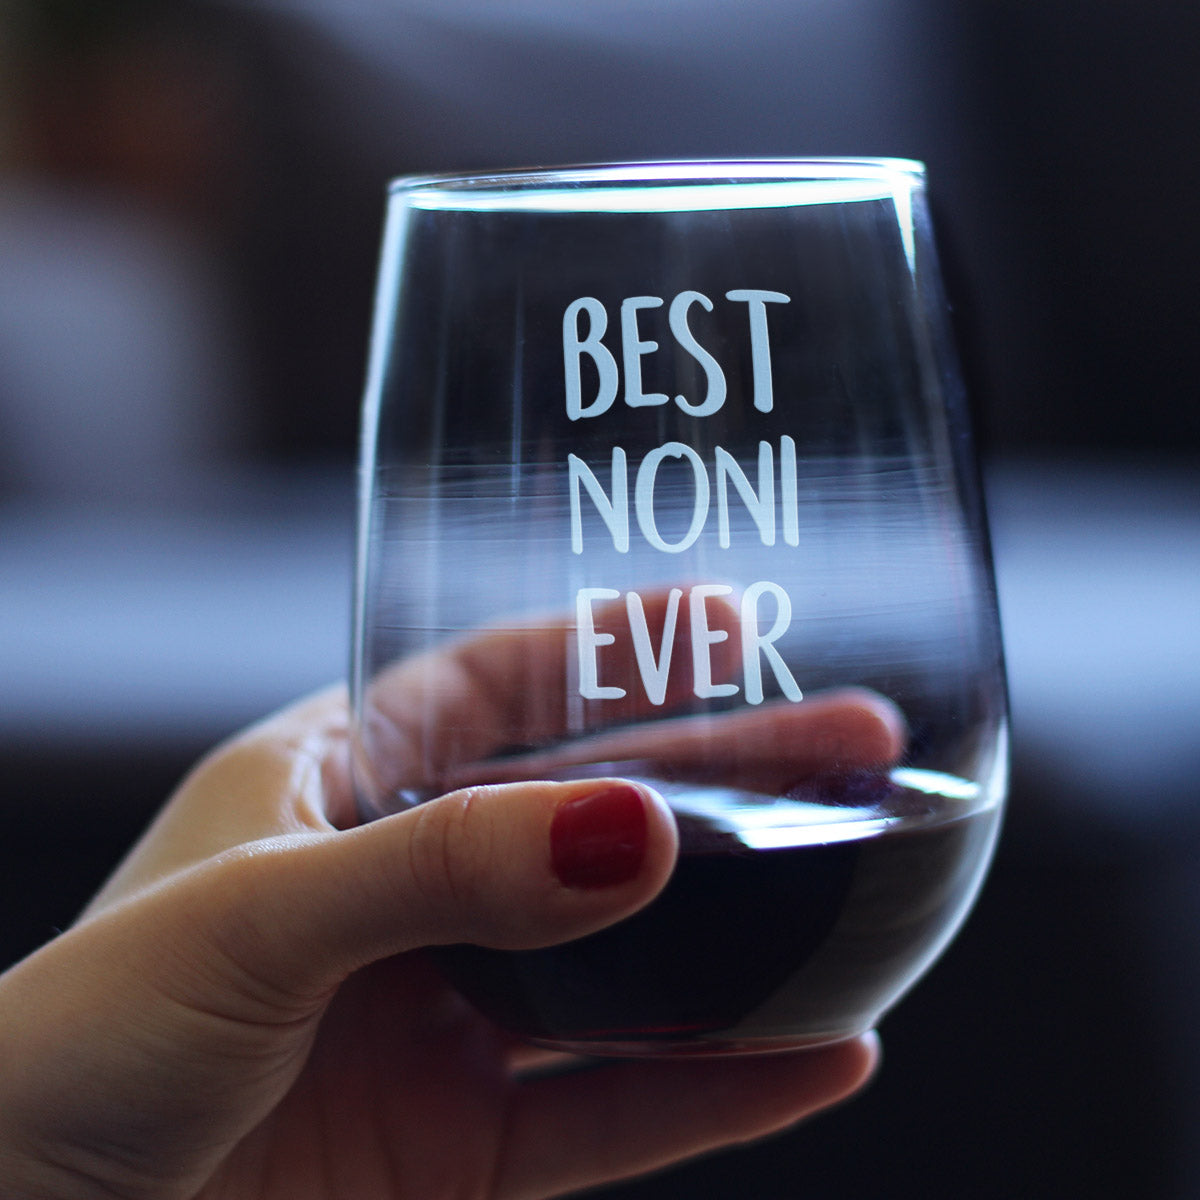 Best Noni Ever Cute Funny Stemless Wine Glass, Large 17 Ounce Size, Etched Sayings, Gift for Grandma